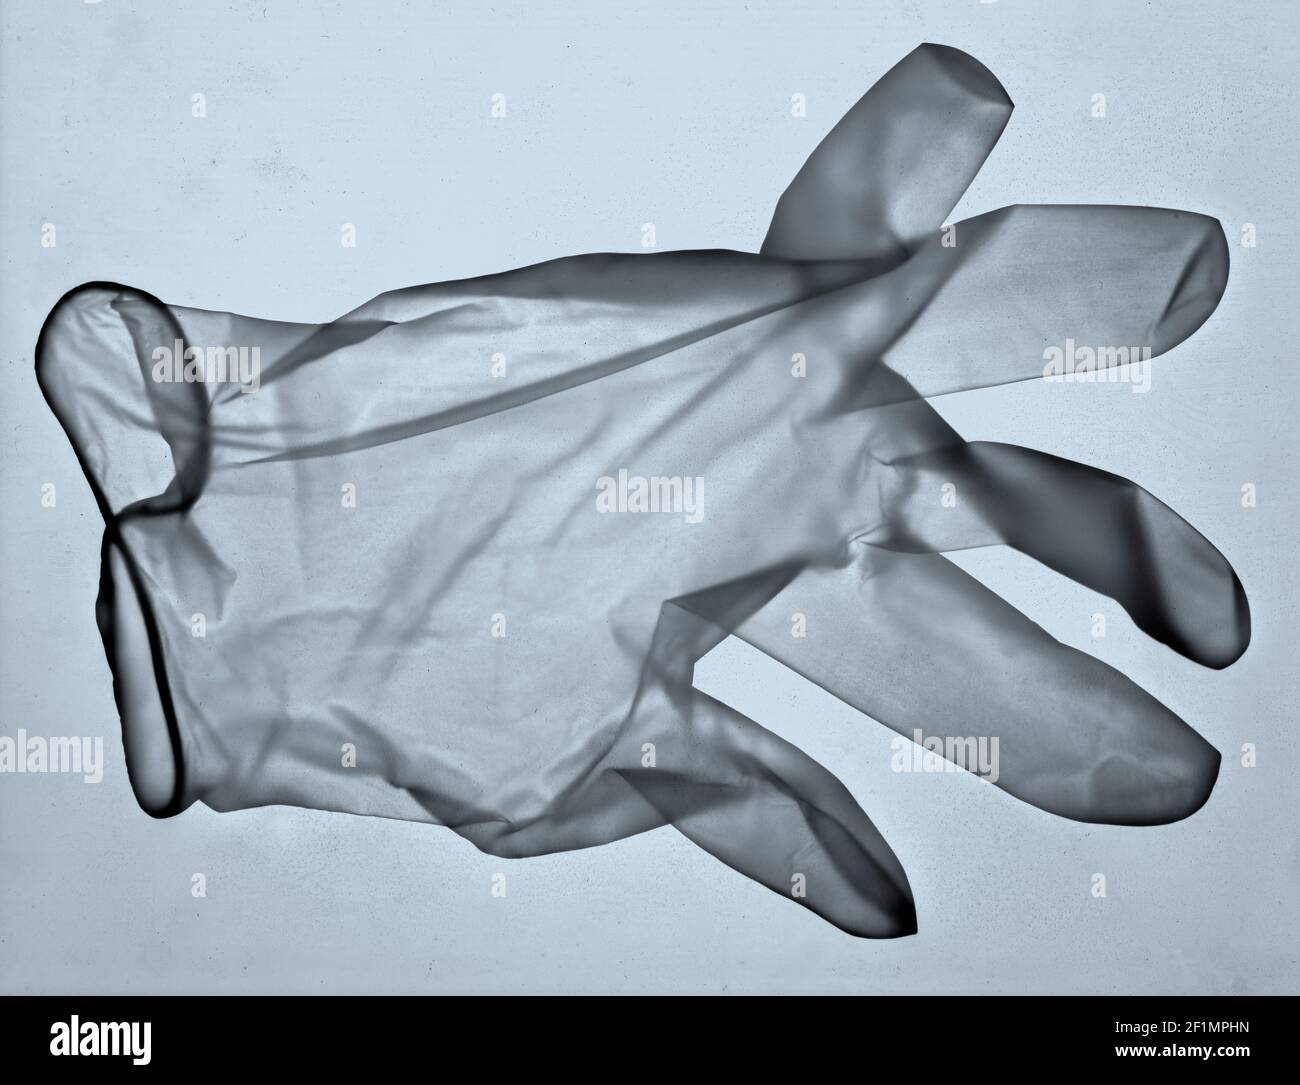 Medical latex disposable glove as an x-ray see-through image with possible virus, contamination and particles. Stock Photo